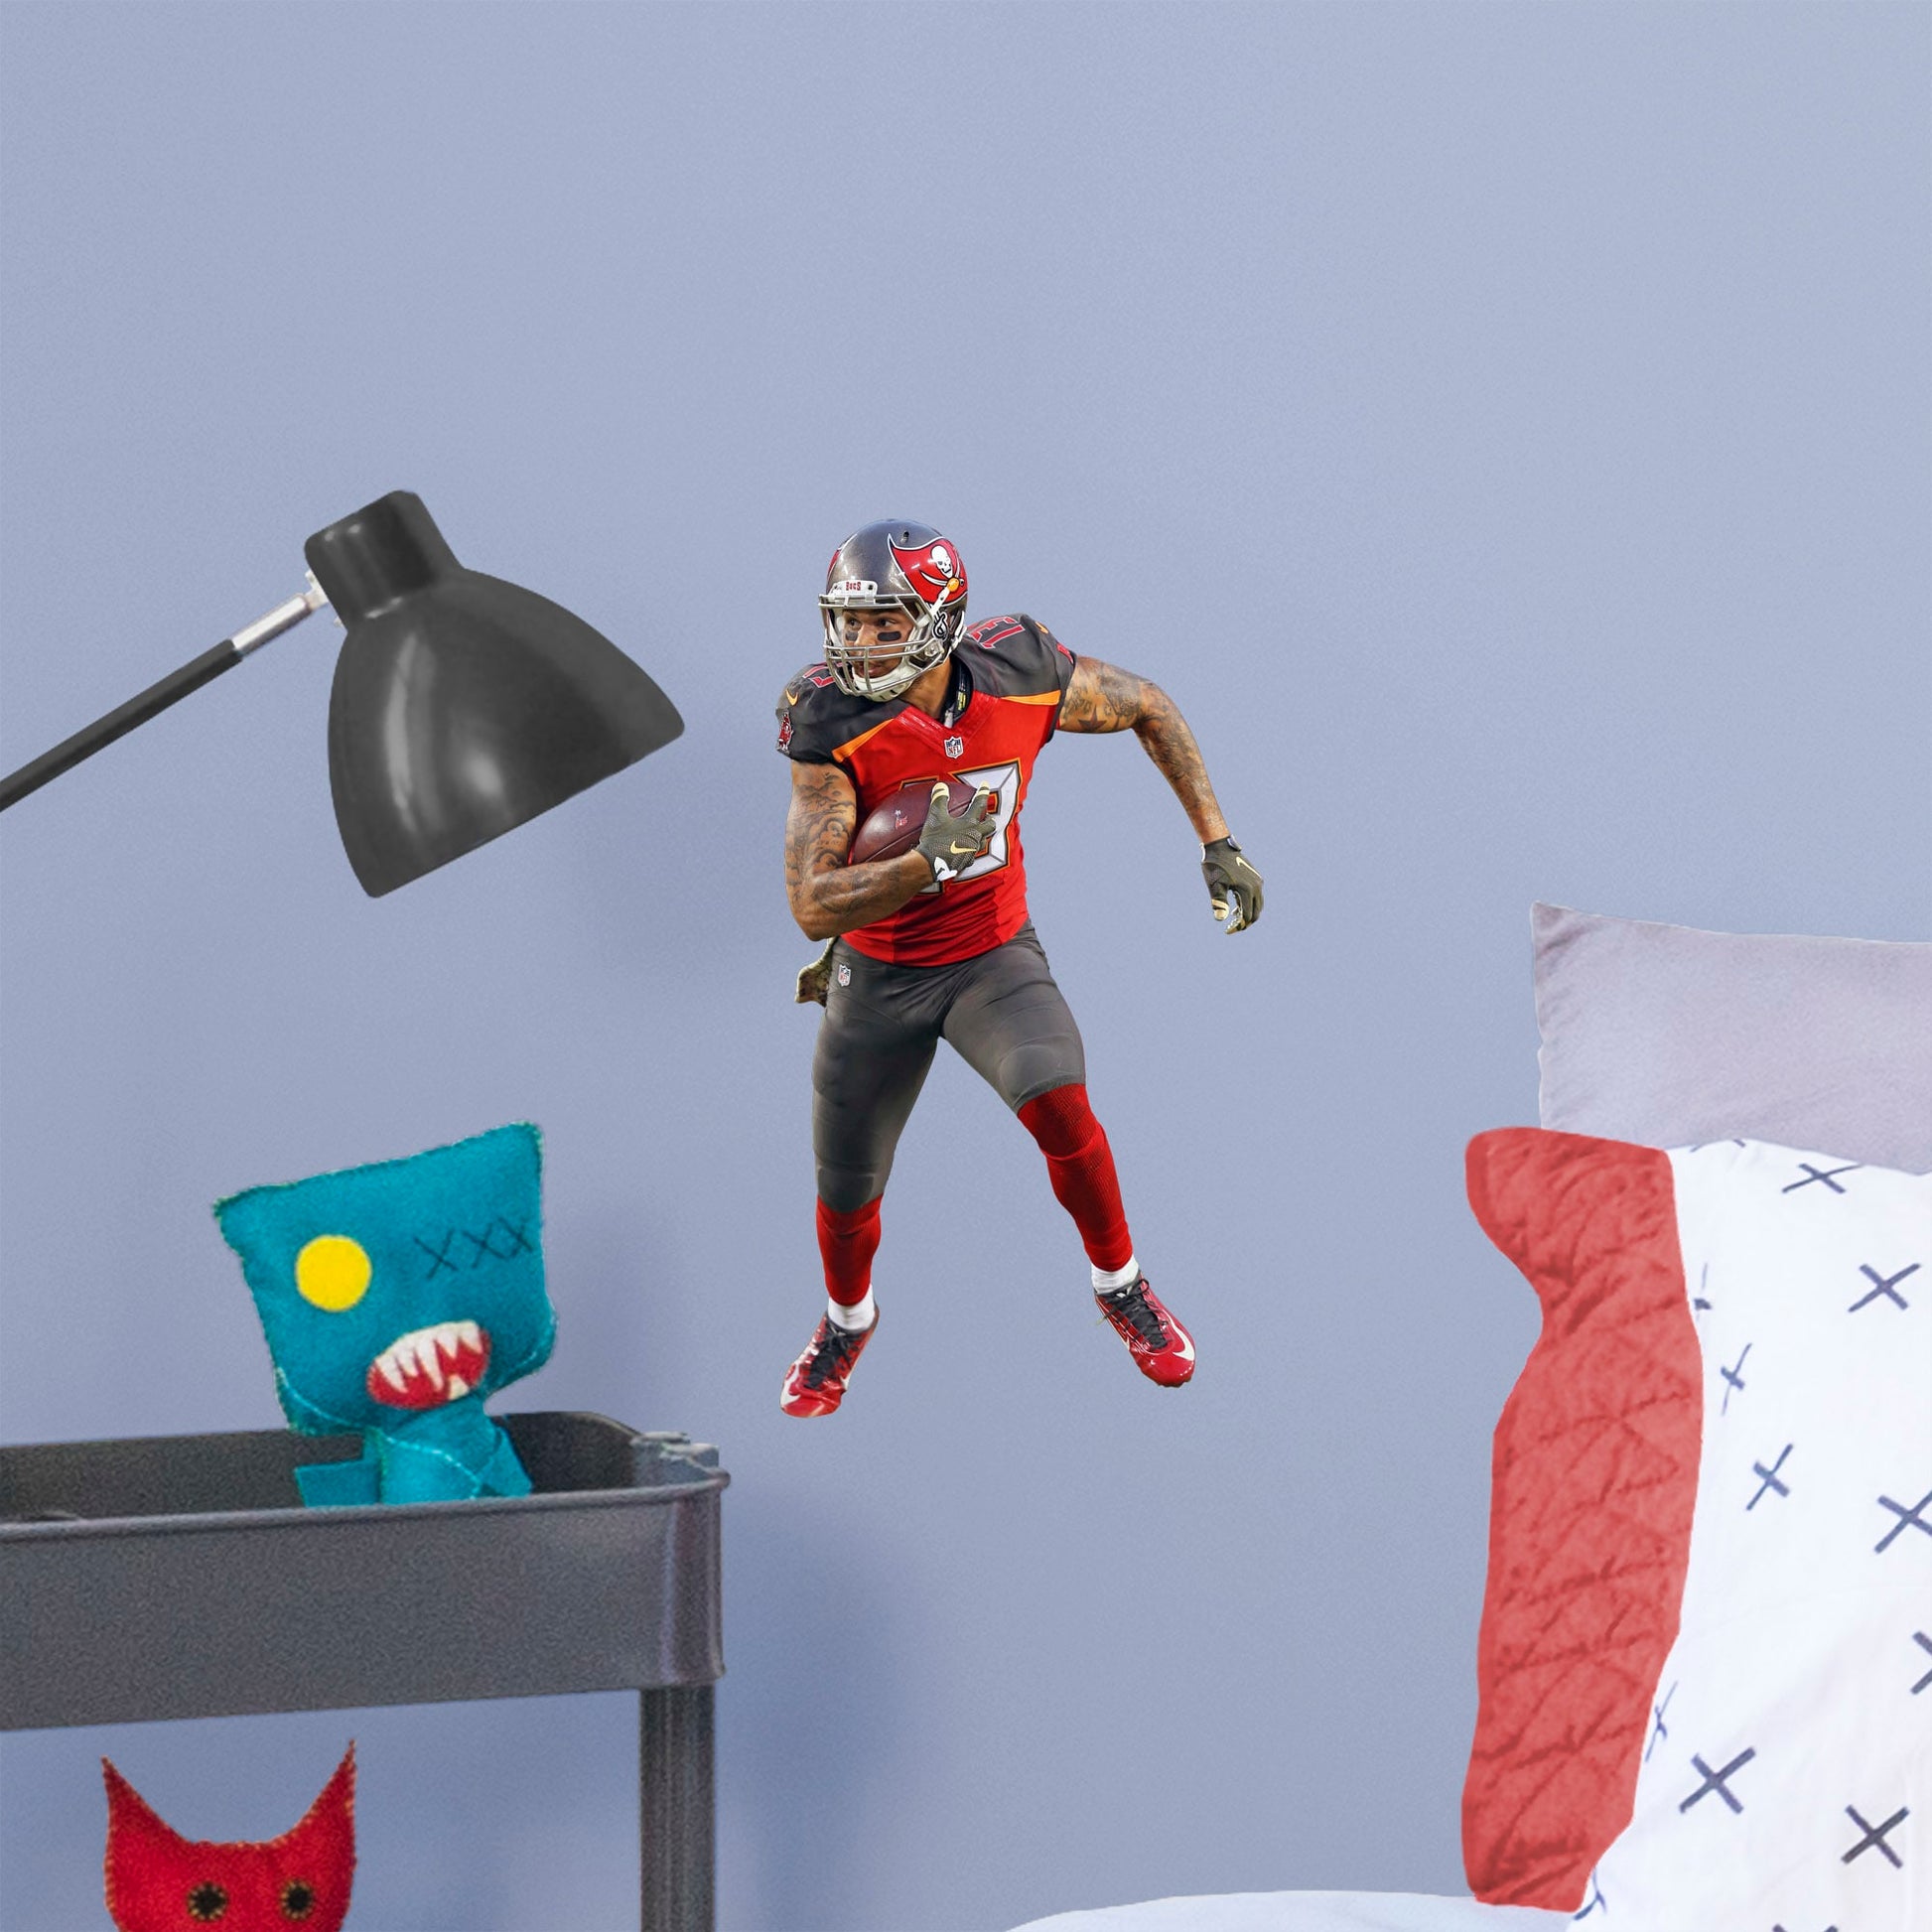 X-Large Athlete + 2 Decals (21"W x 39"H) Bring the action of the NFL into your home with a wall decal of Mike Evans! High quality, durable, and tear resistant, you'll be able to stick and move it as many times as you want to create the ultimate football experience in any room!